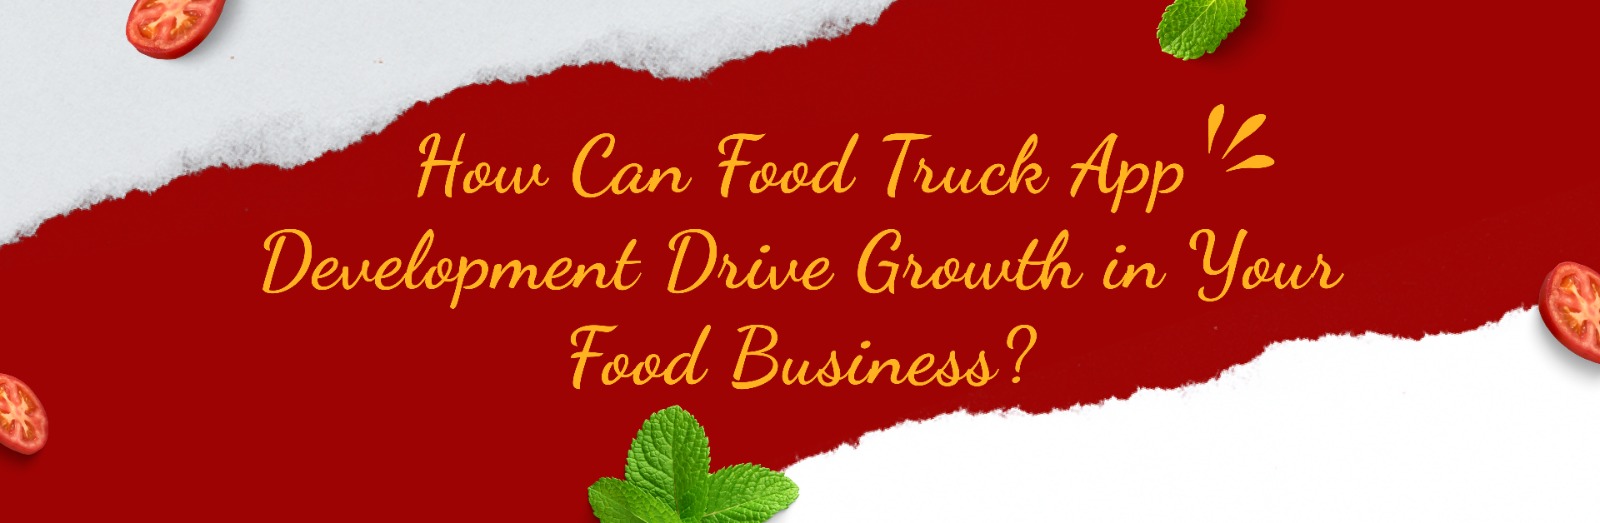 How Can Food Truck App Development Drive Growth in Your Food Business?